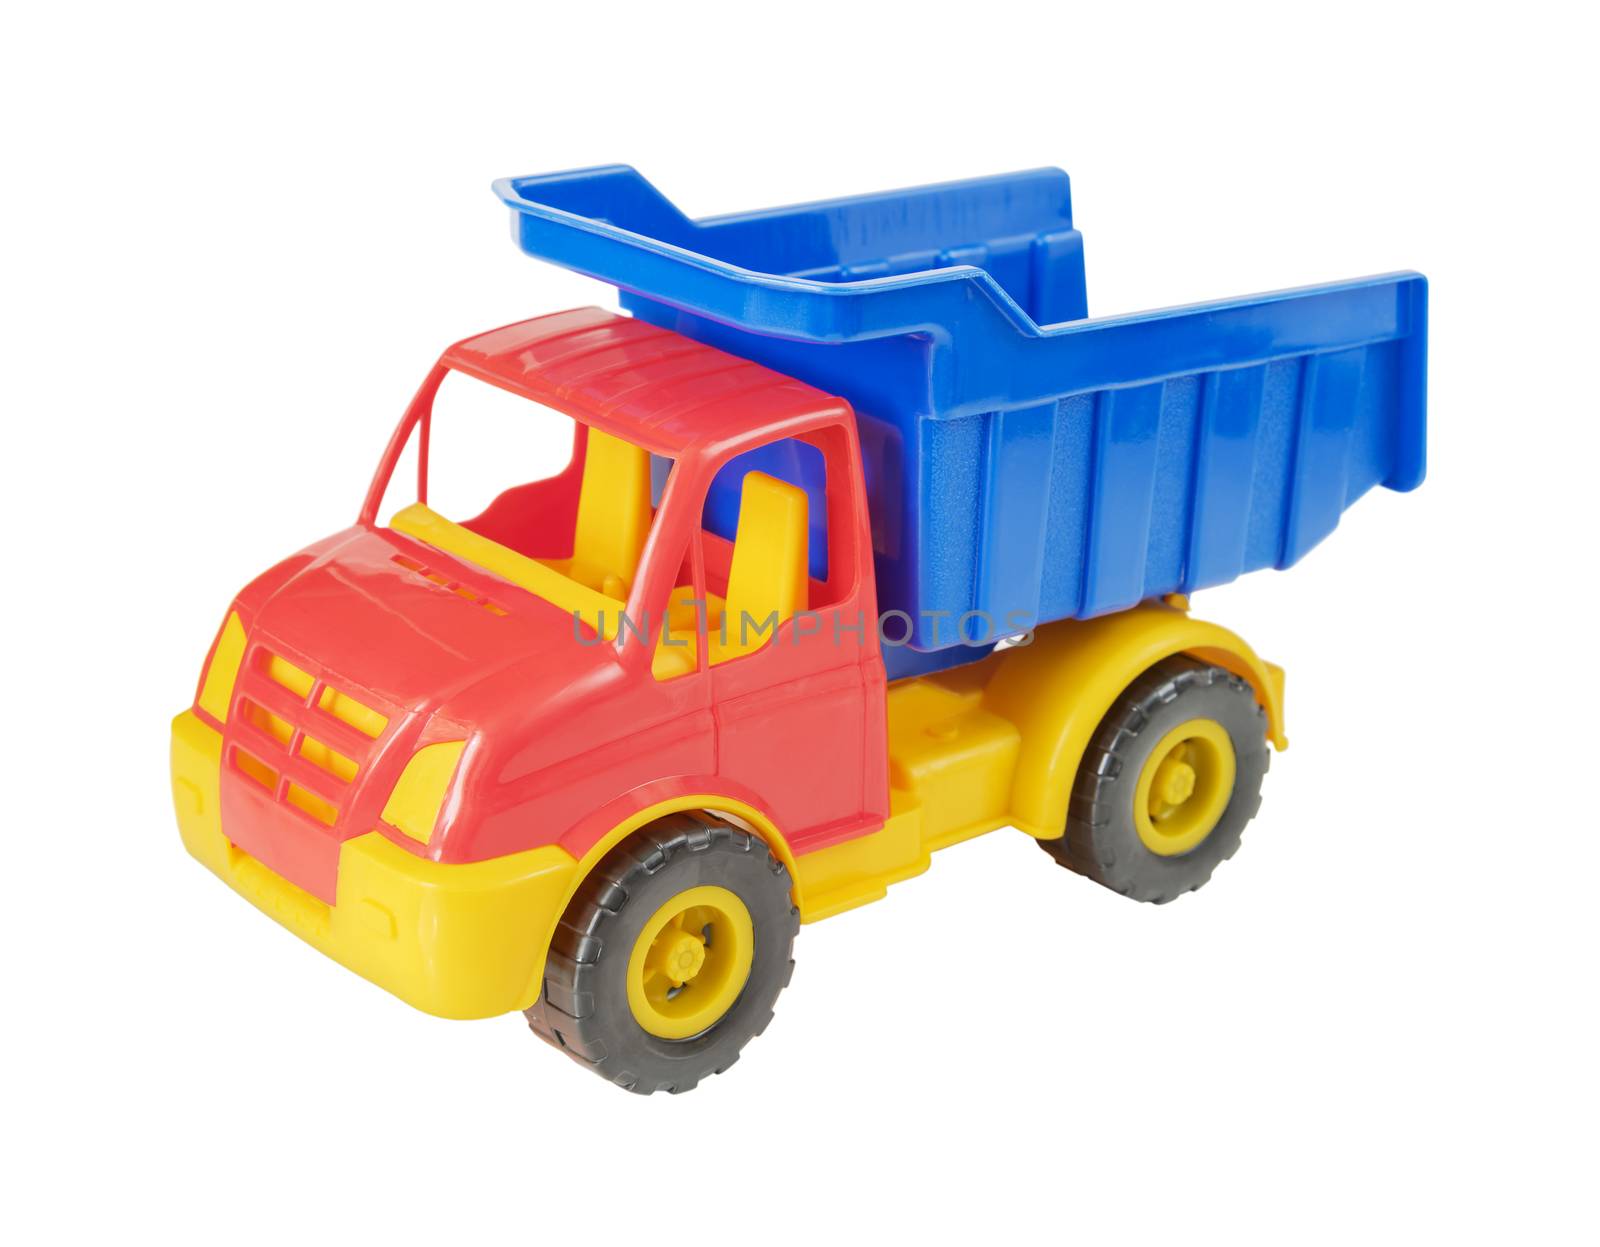 Multicolored plastic toy truck isolated on white background